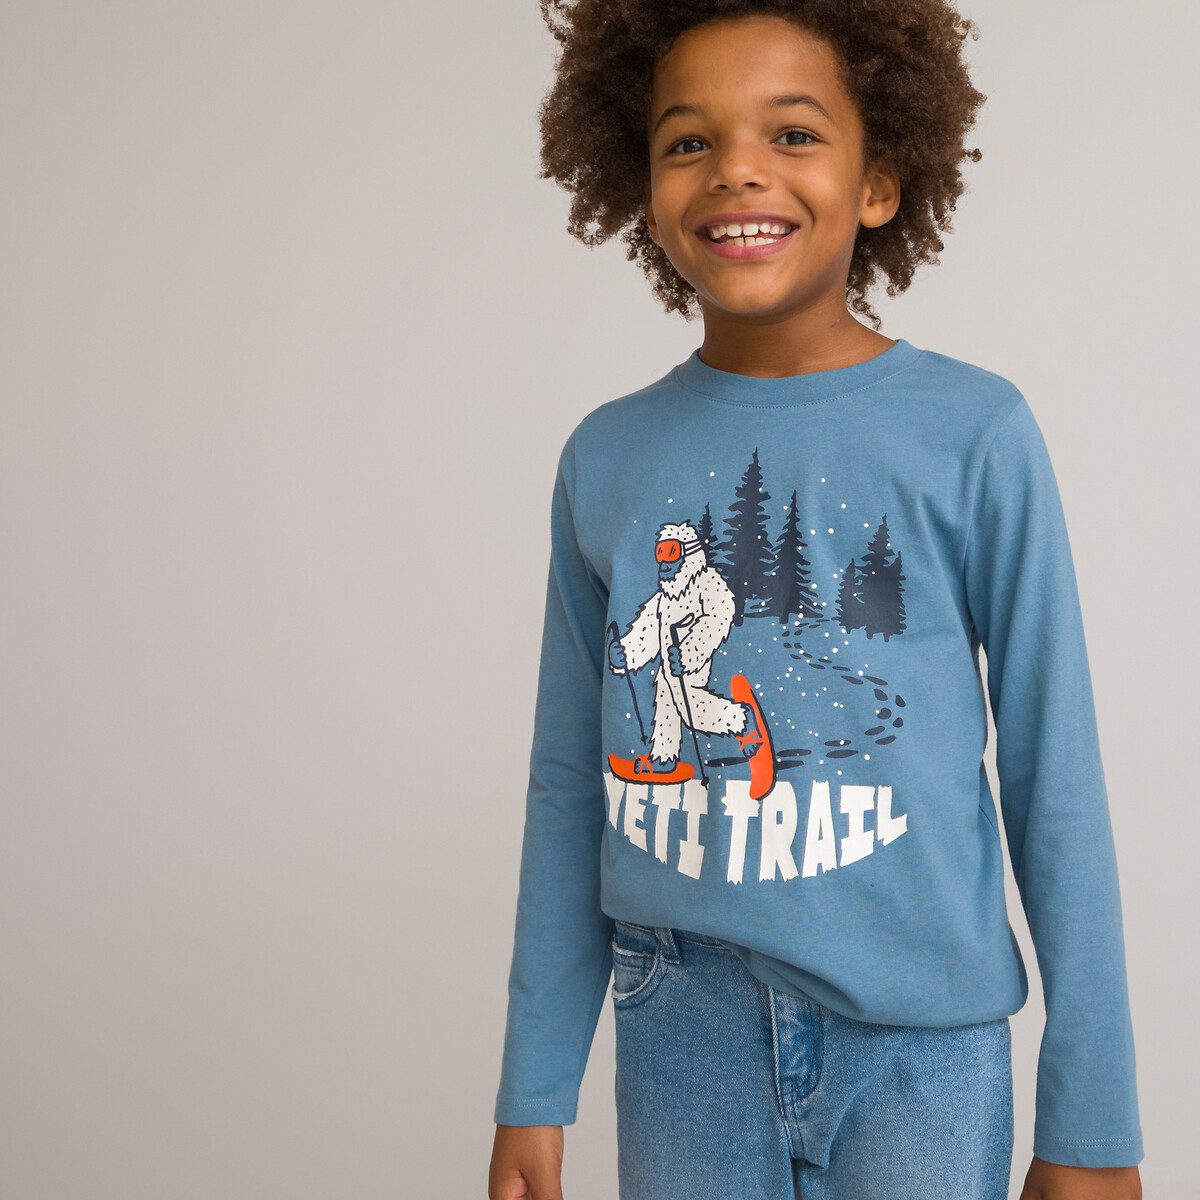 Yeti Print Cotton T-Shirt with Long Sleeves